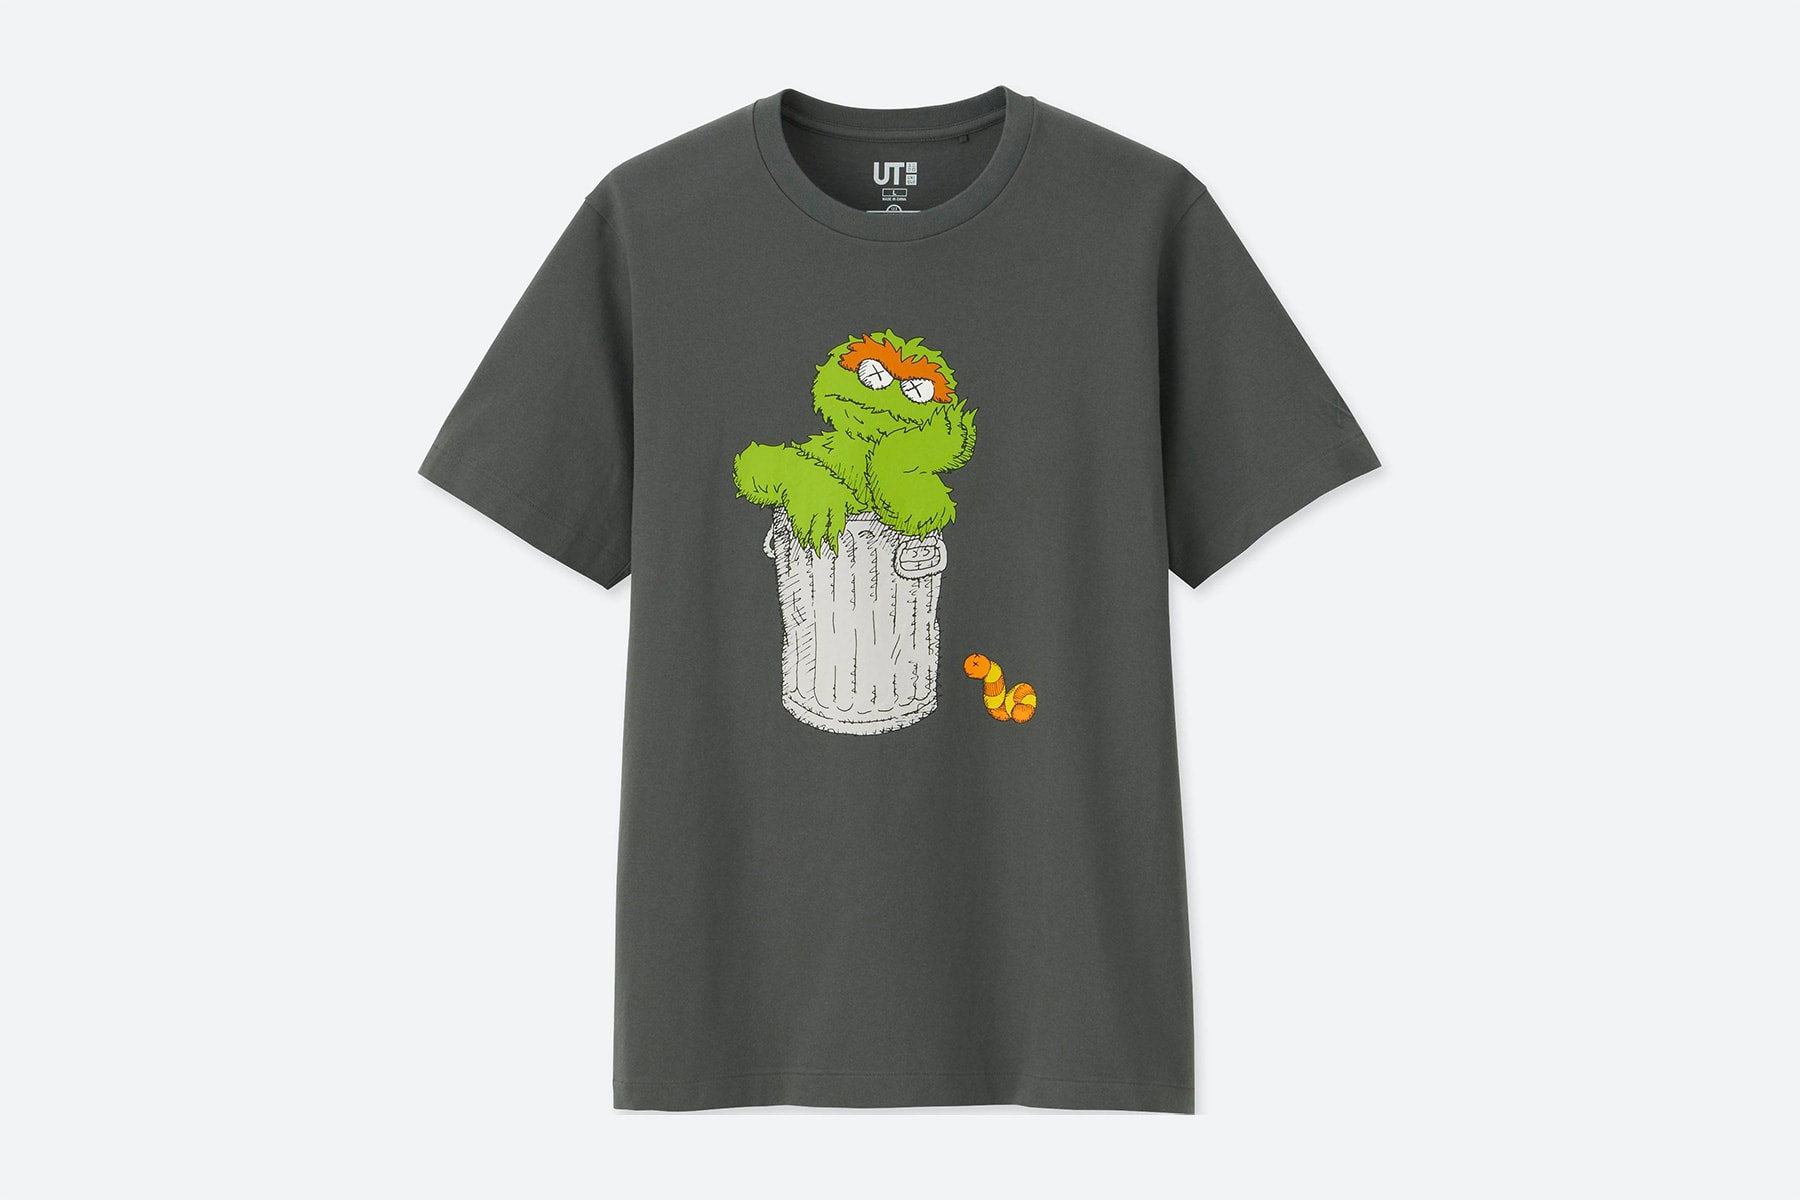 KAWS x Uniqlo UT 'Sesame Street' T-Shirt Collection t-shirt adult kids price release date every piece